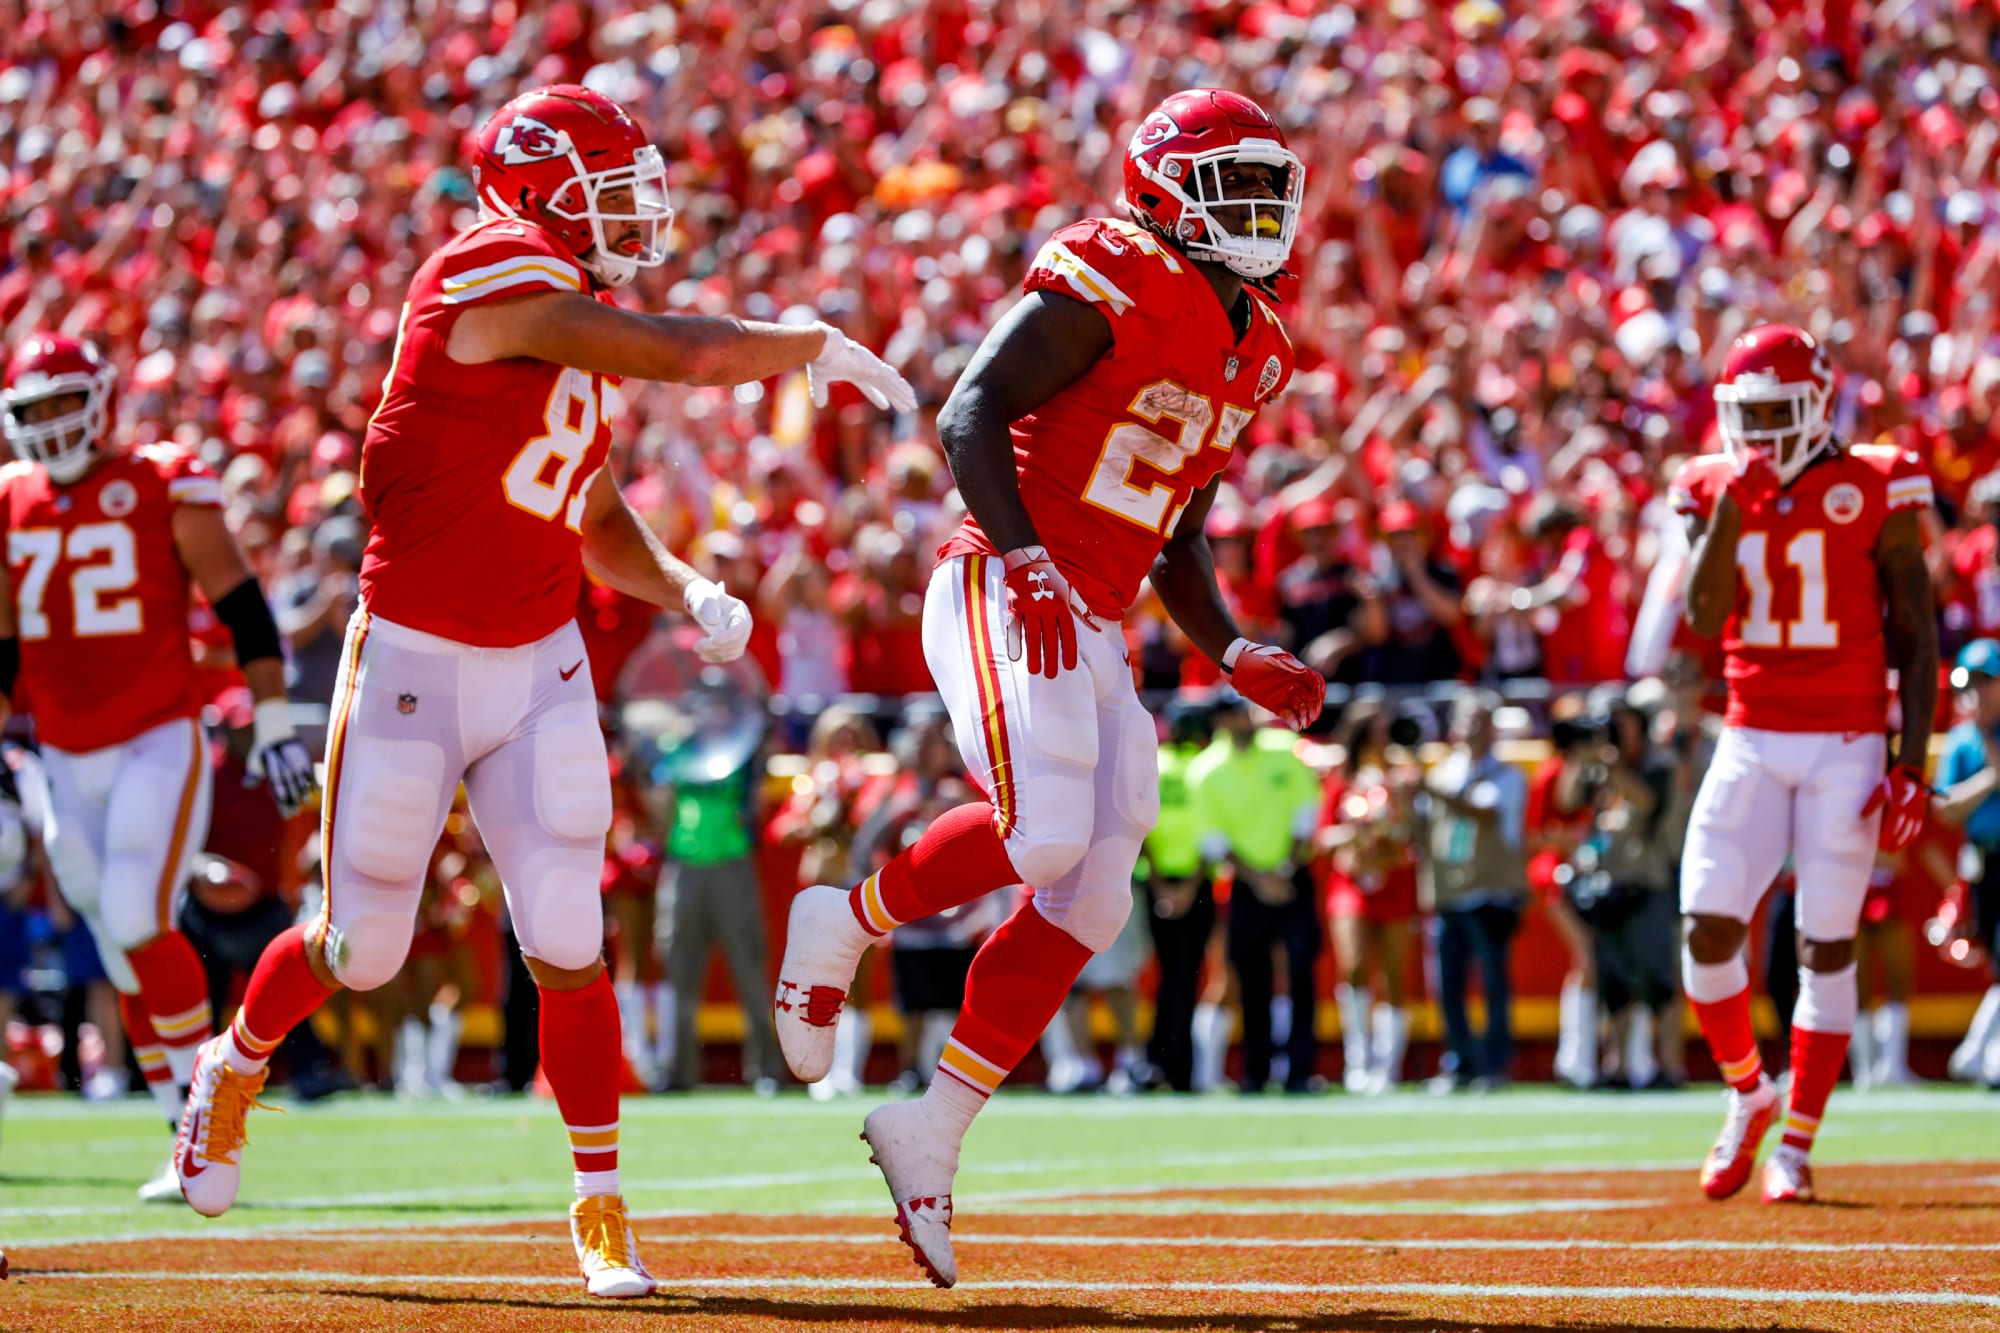 The Kansas City Chiefs offensive success is good for business